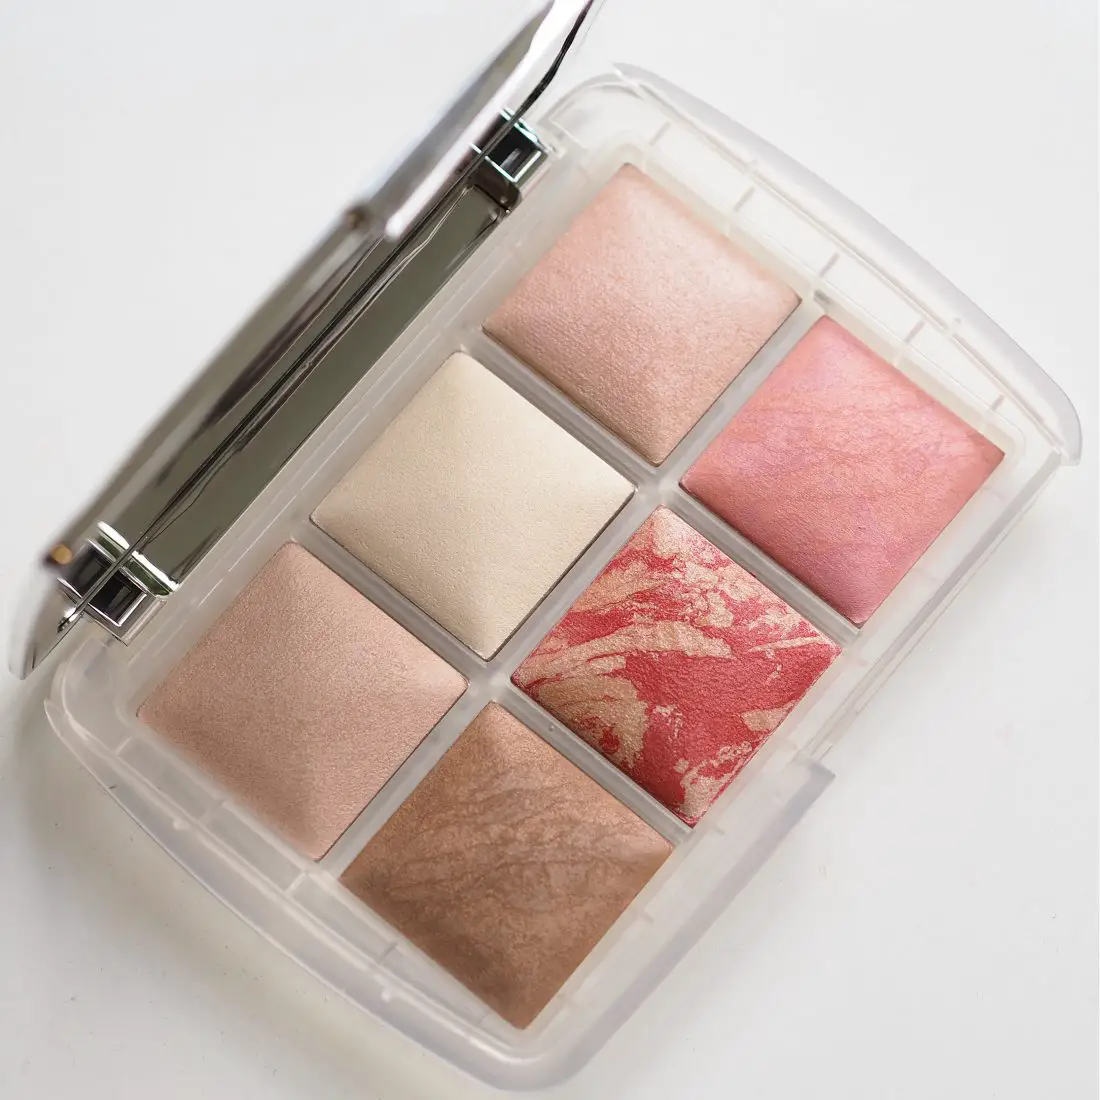 Hourglass Ambient Lighting Edit Ghost | British Beauty Blogger